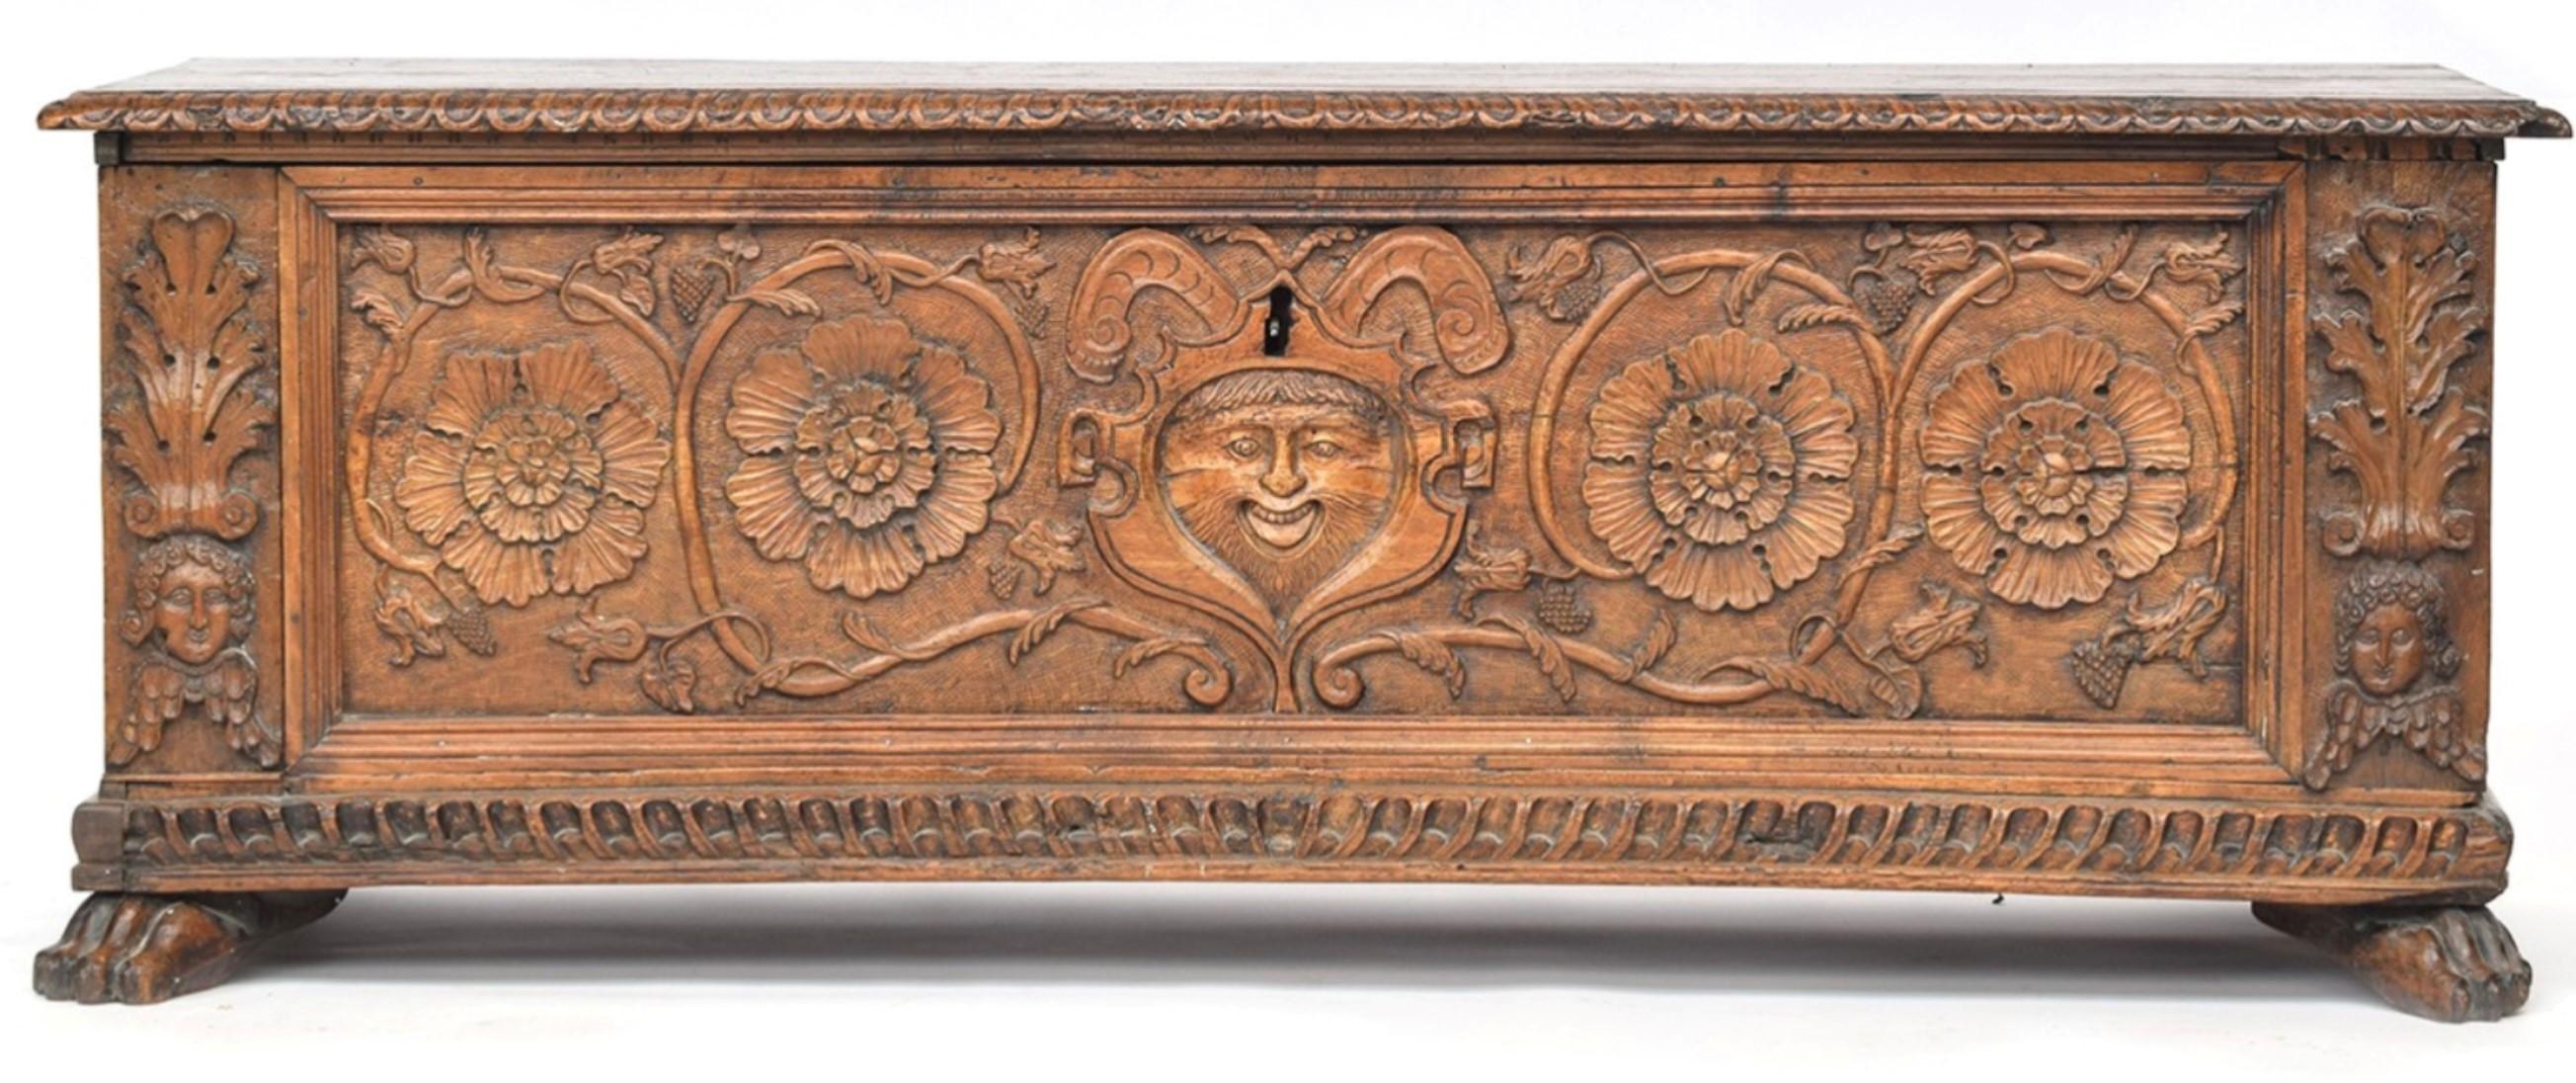 Absolutely stunning and elaborately carved 16th century and later Italian walnut cassone / wedding chest, with hinged lid with gadrooned edge. The front panel hand carved with central human mask, and floral motifs, outer acanthus detail is set above